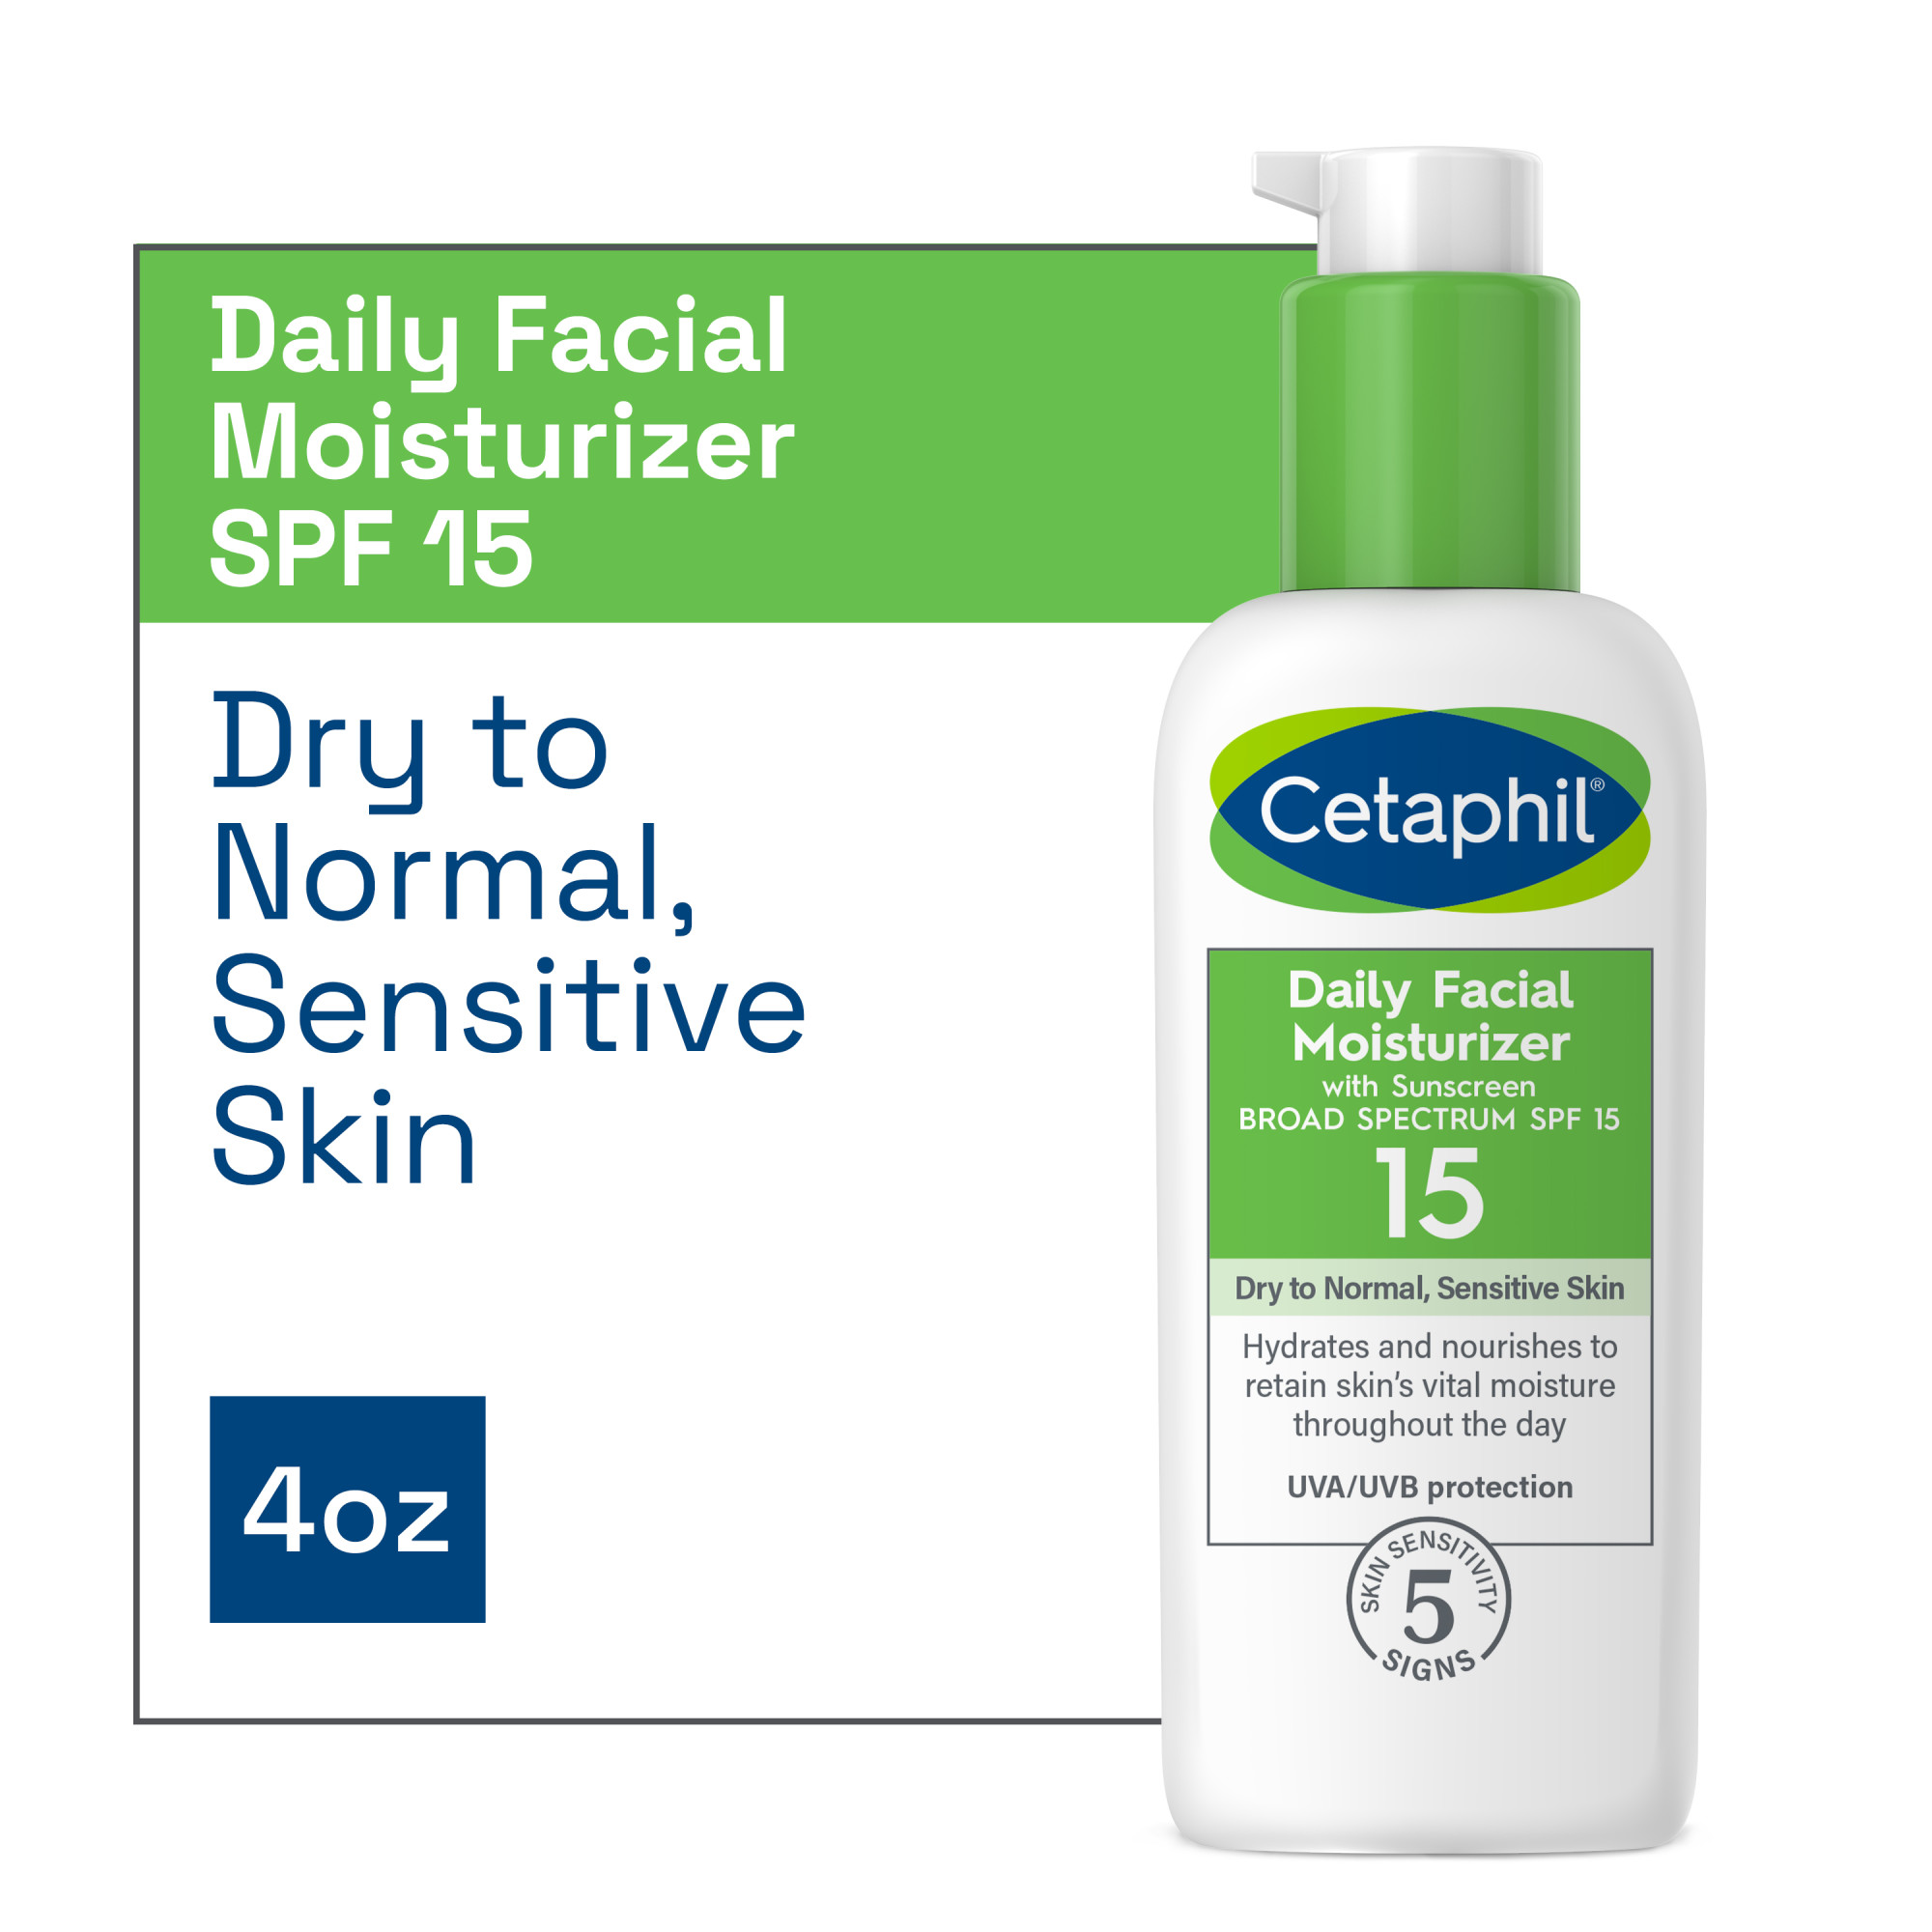 Cetaphil Daily Facial Moisturizer With Sunscreen, Broad Spectrum SPF 15, Fragrance Free, 4 oz - image 1 of 10